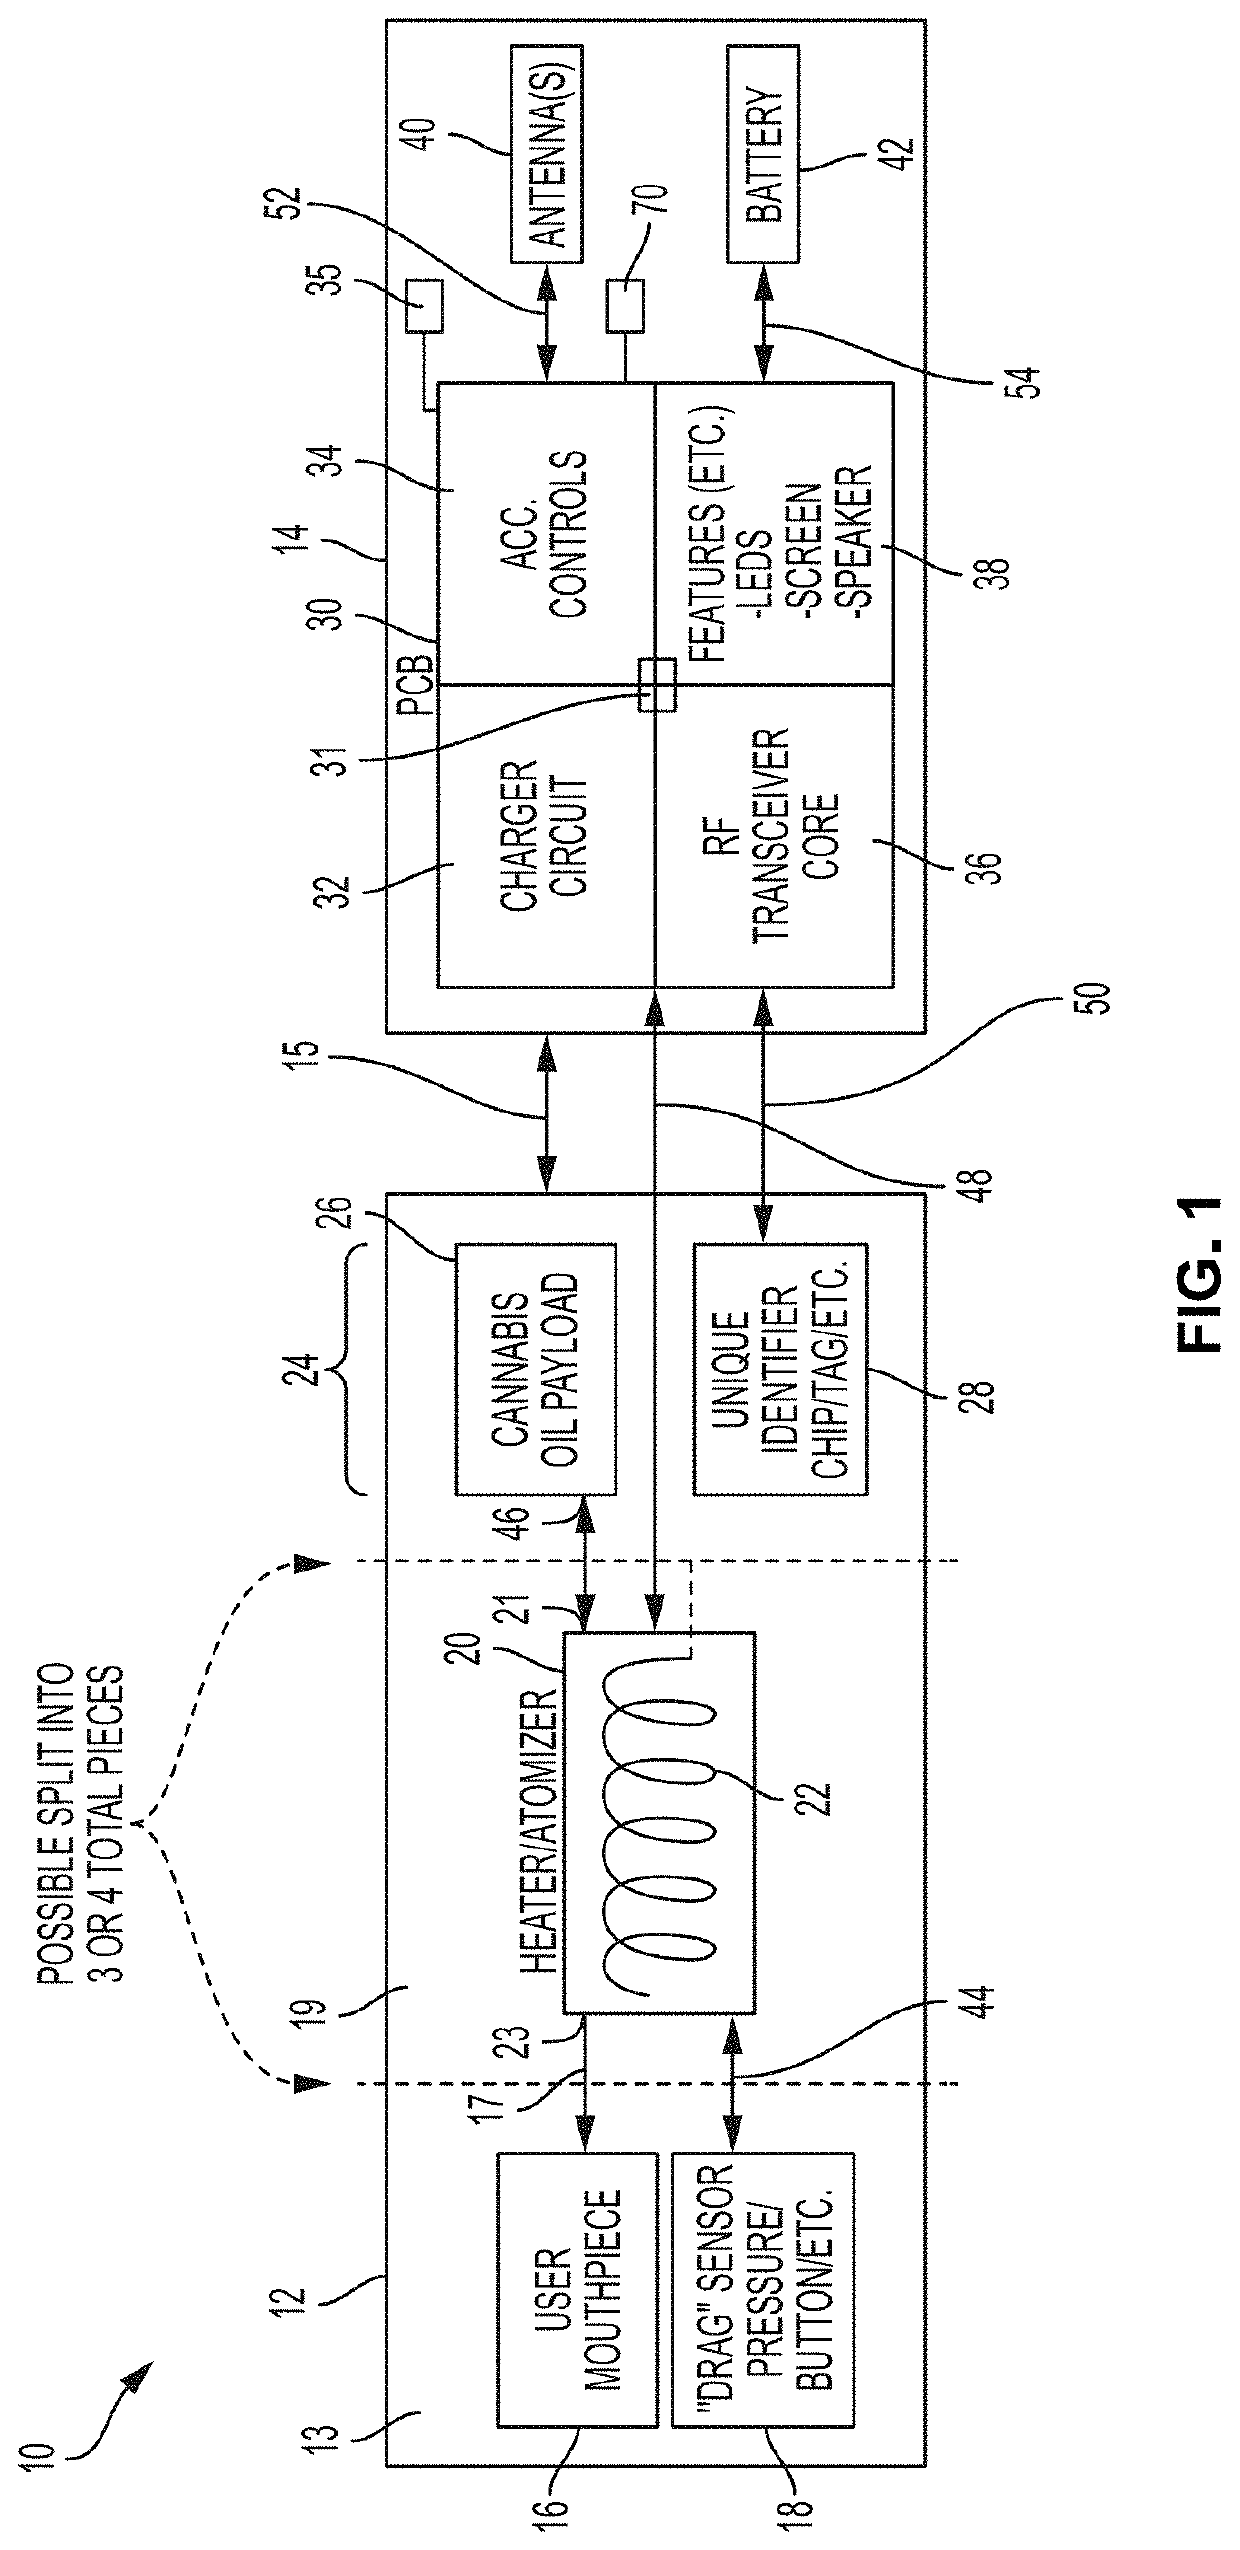 Vaporizer system with dose-metering for reducing consumption of a substance